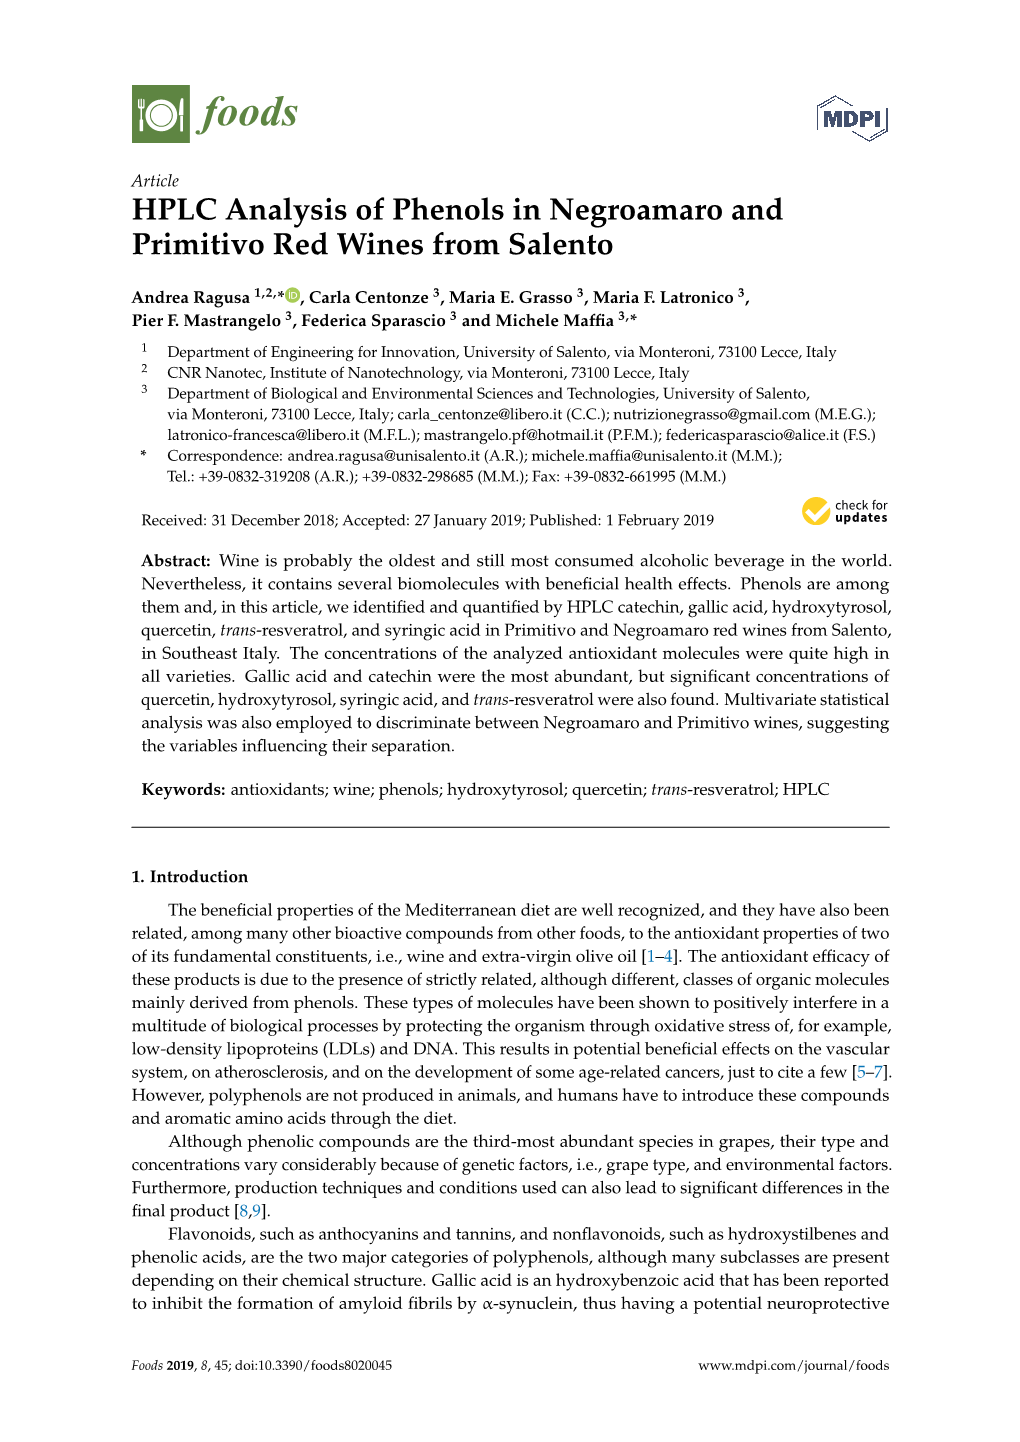 HPLC Analysis of Phenols in Negroamaro and Primitivo Red Wines from Salento